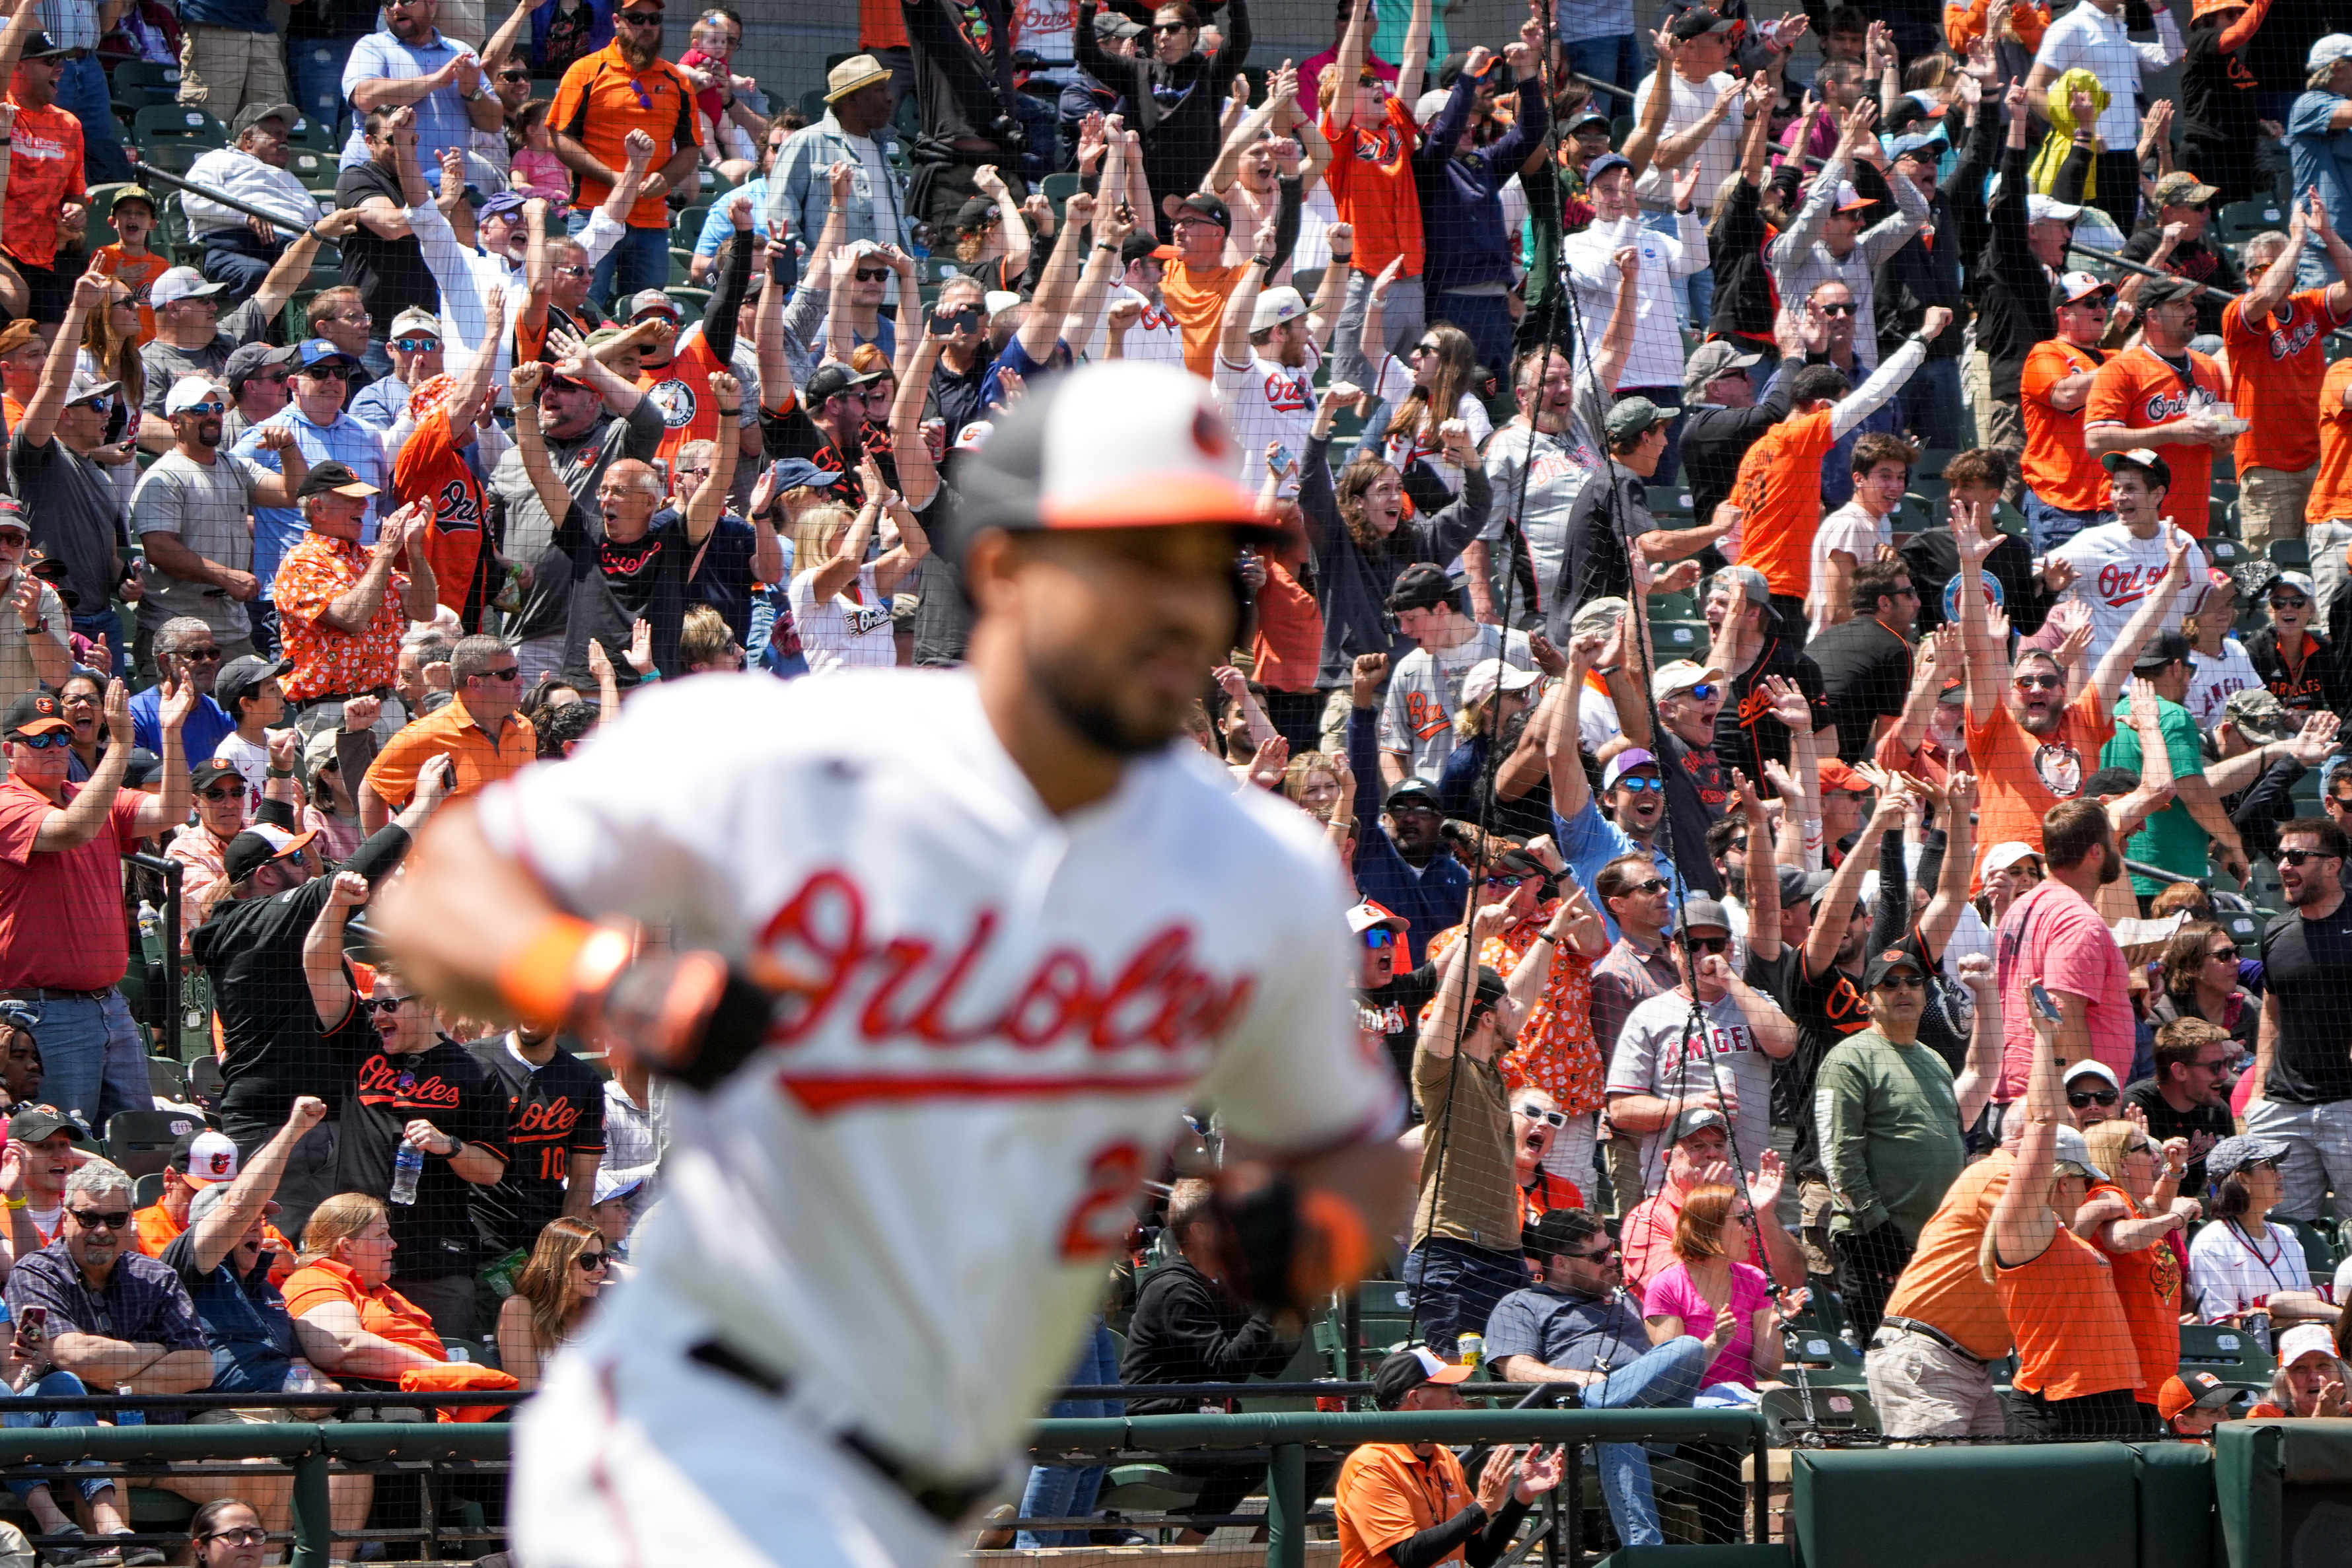 The Orioles are heading to the playoffs. Here's everything you